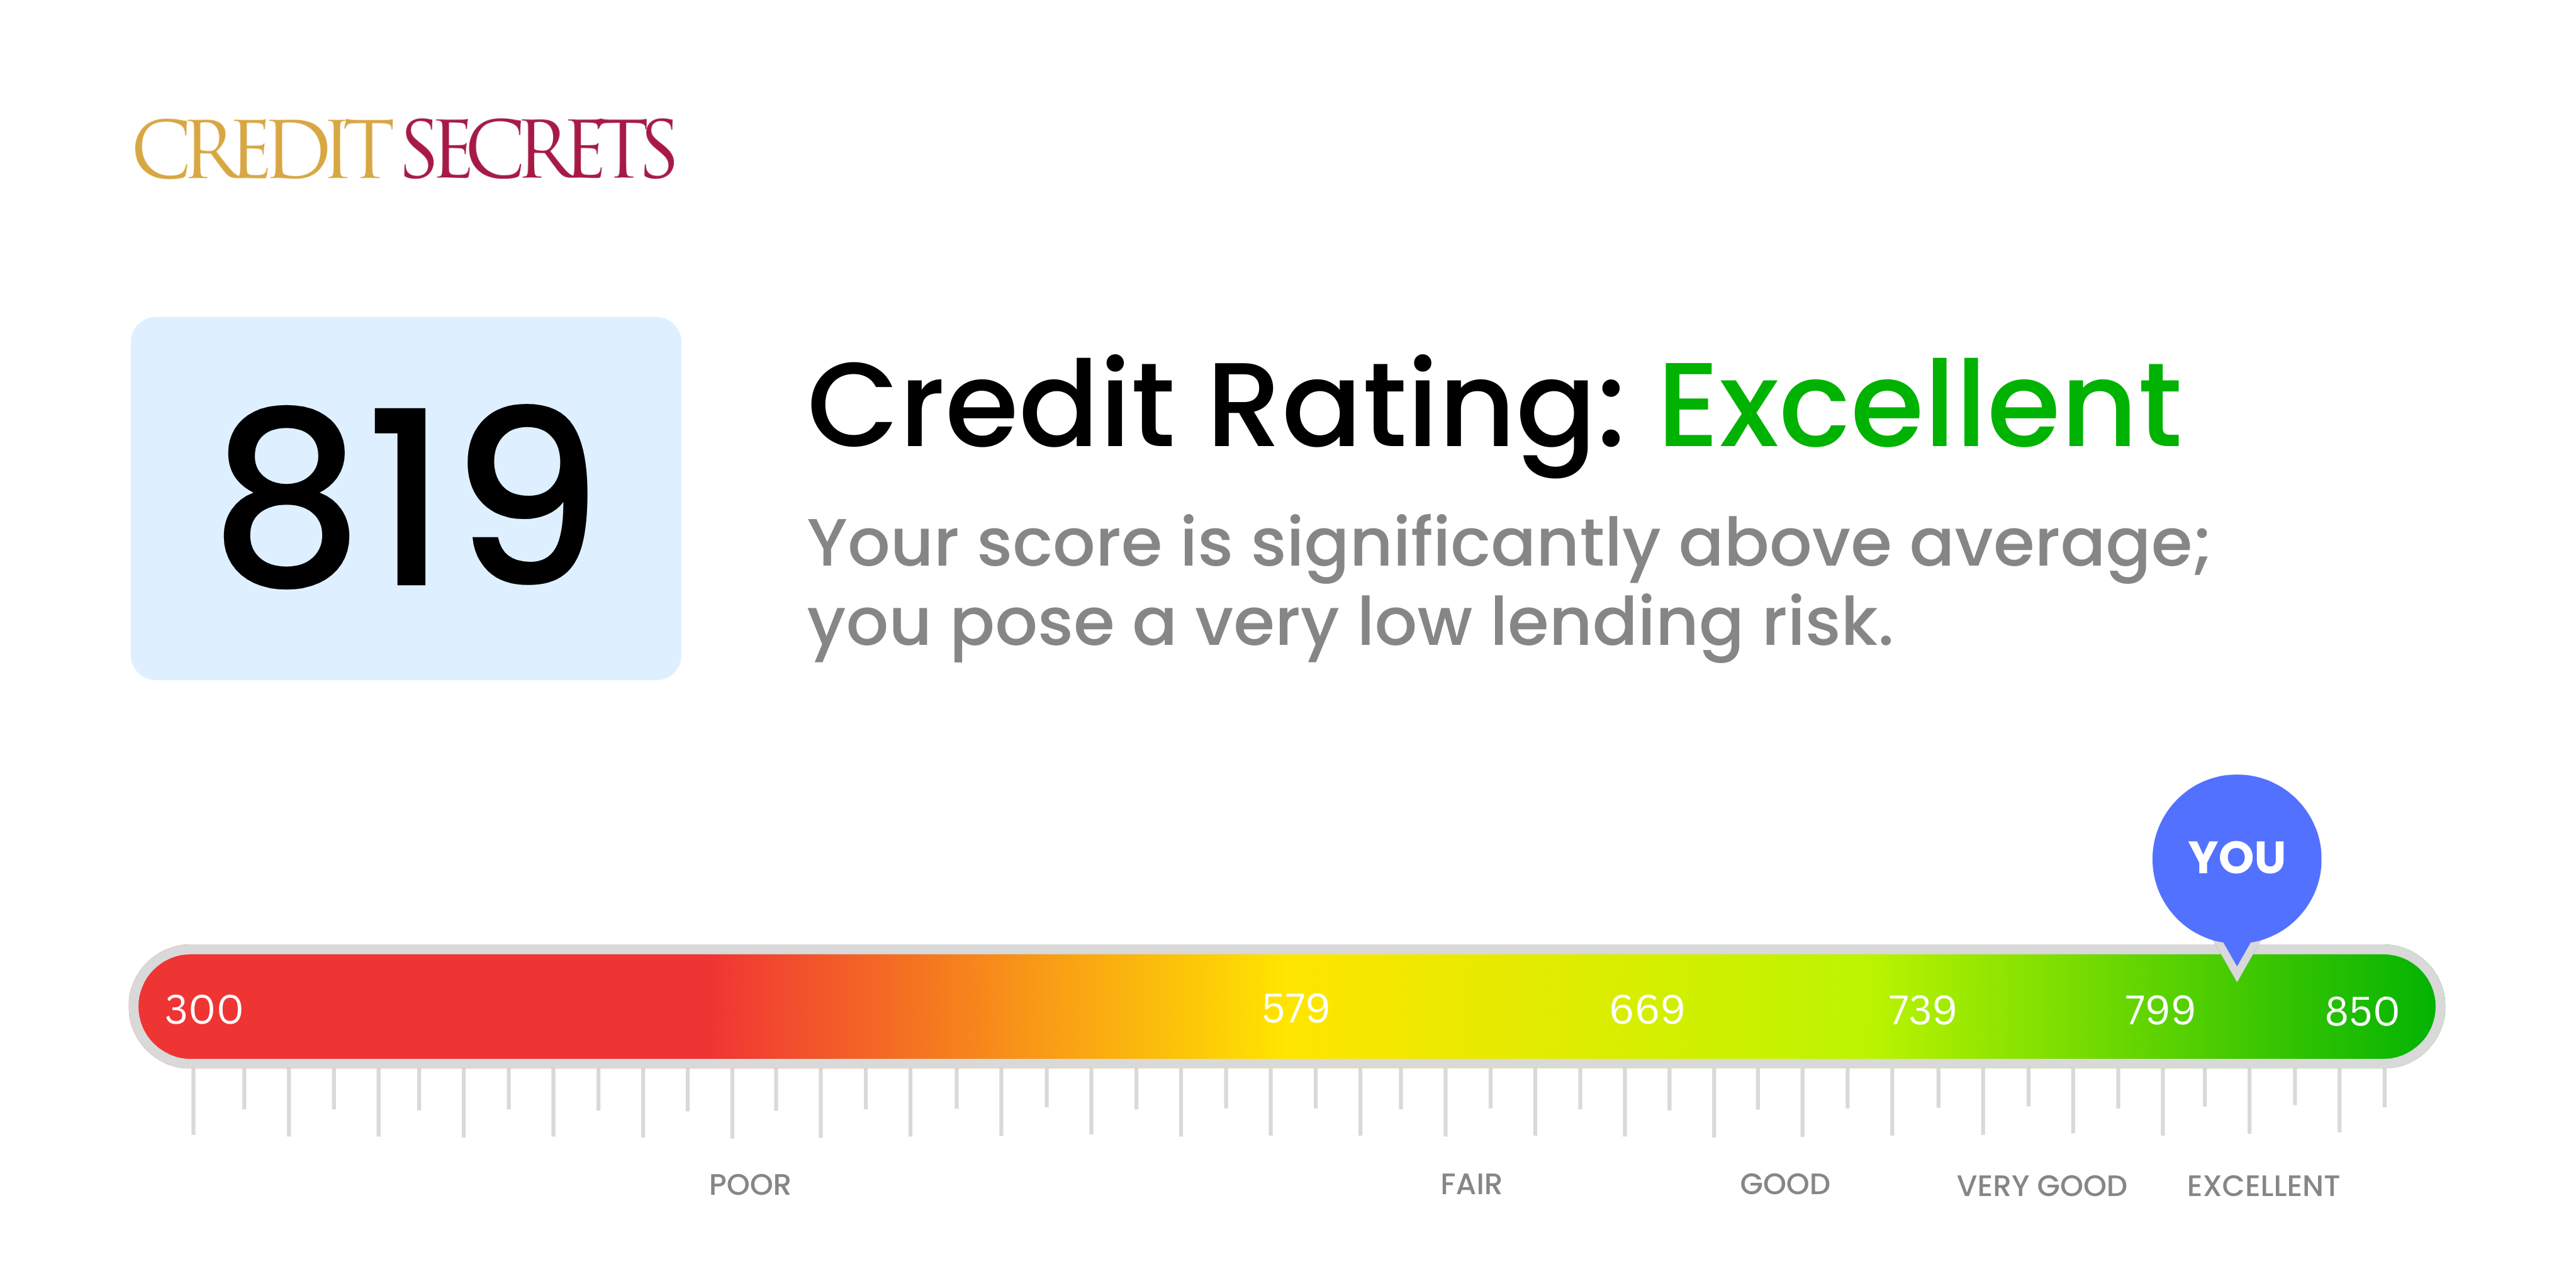 Is 819 a good credit score?